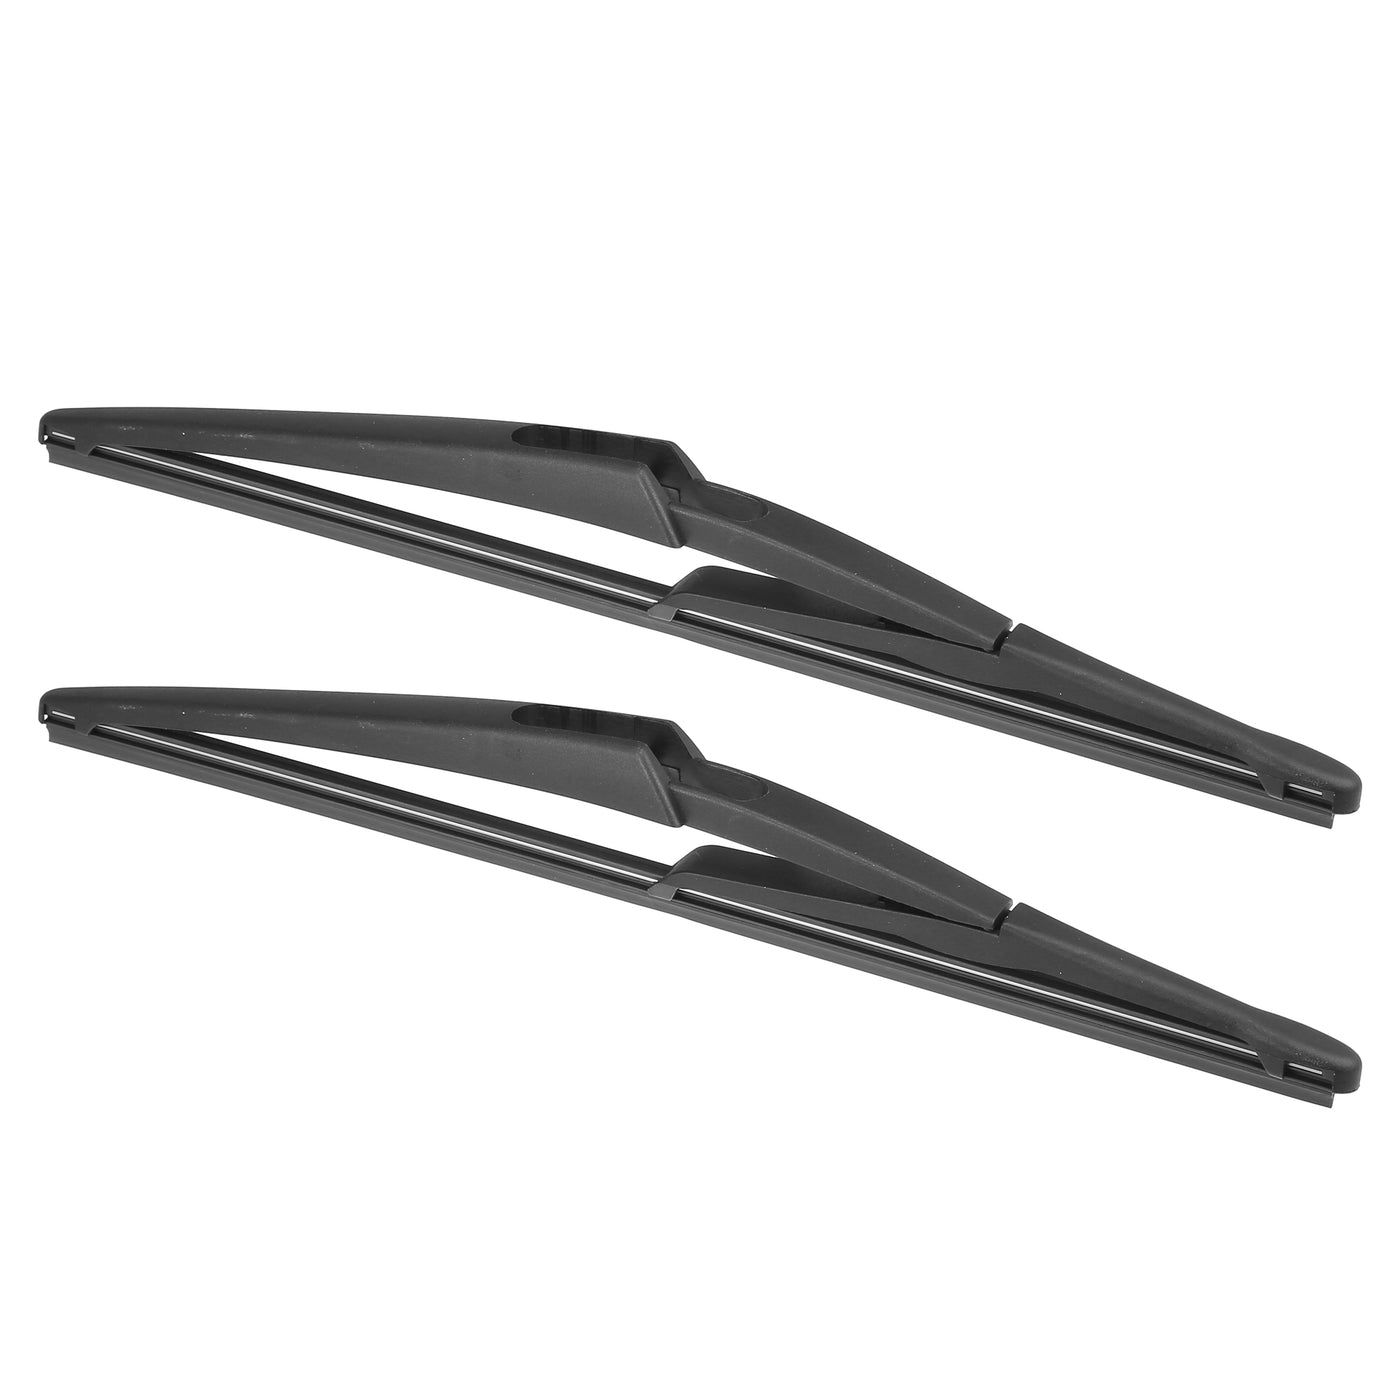 X AUTOHAUX 2pcs Rear Windshield Wiper Blade Replacement for Nissan Rogue 2009-2016 for Nissan Pathfinder 2015-2016 for Mercedes Benz A-Class W169 2004-2012